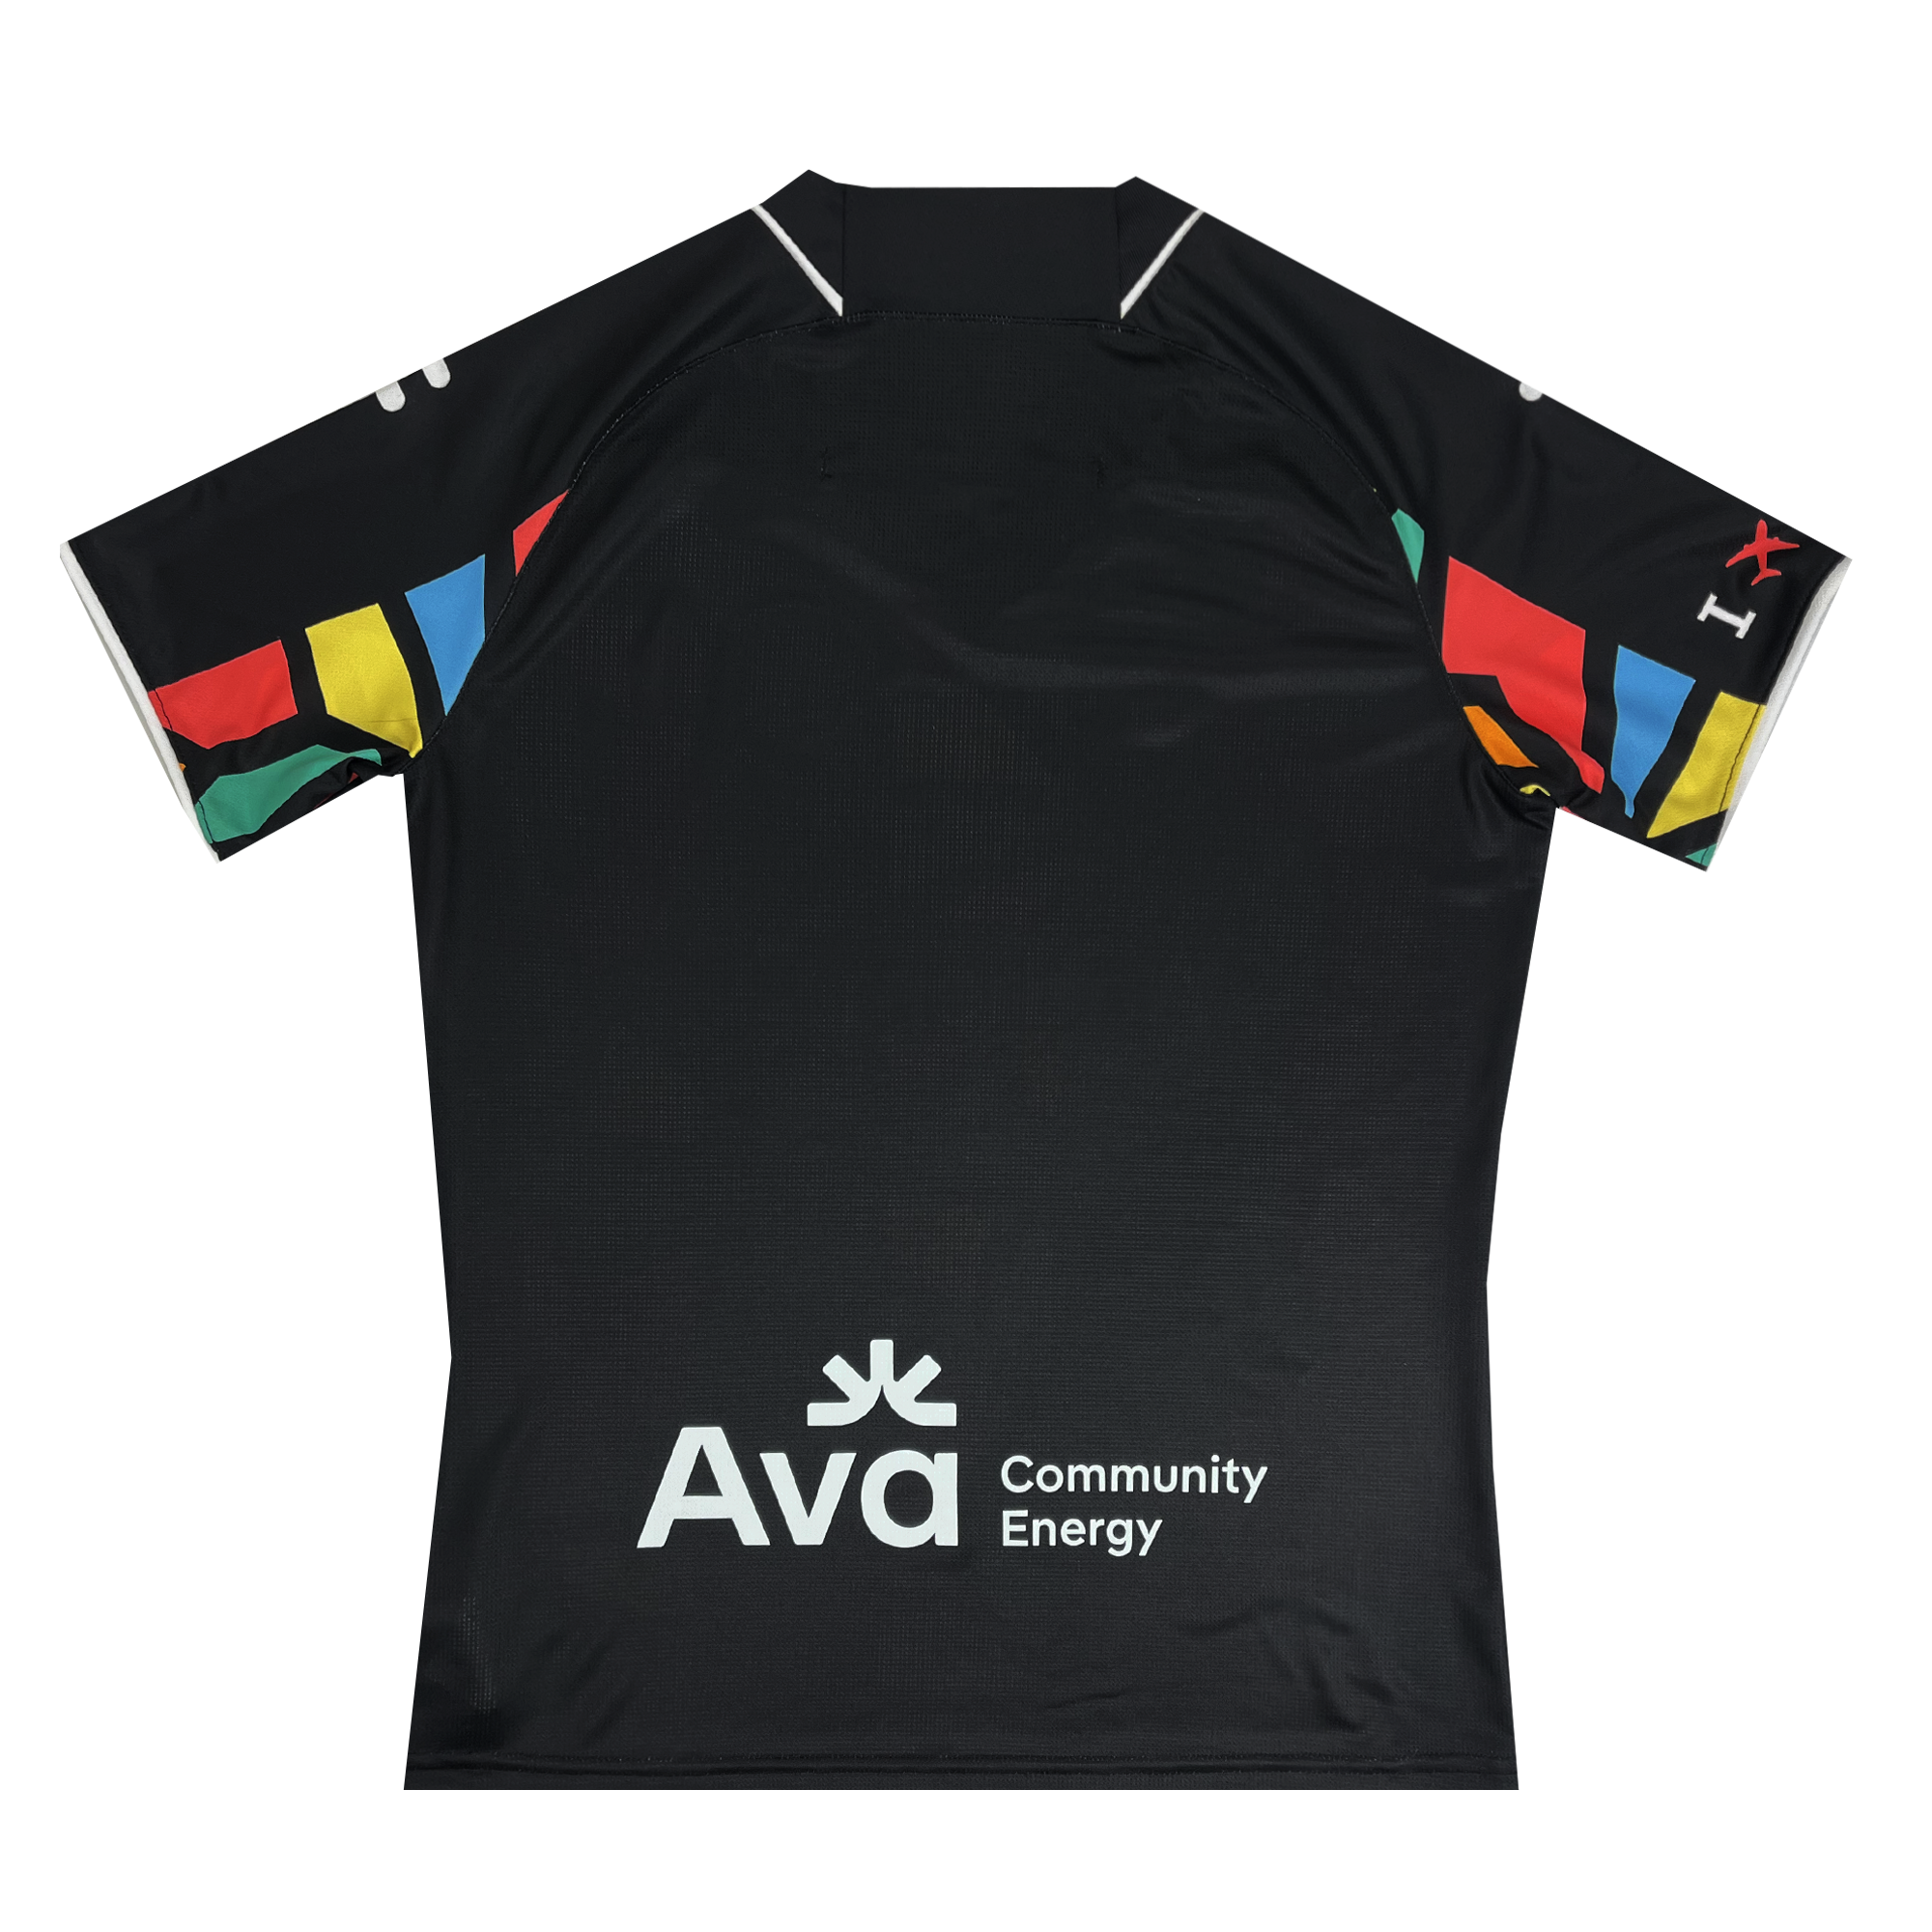 Back view of women's black Oakland Soul SC Home jersey with Multicolor details and Ava Community Energy logo.